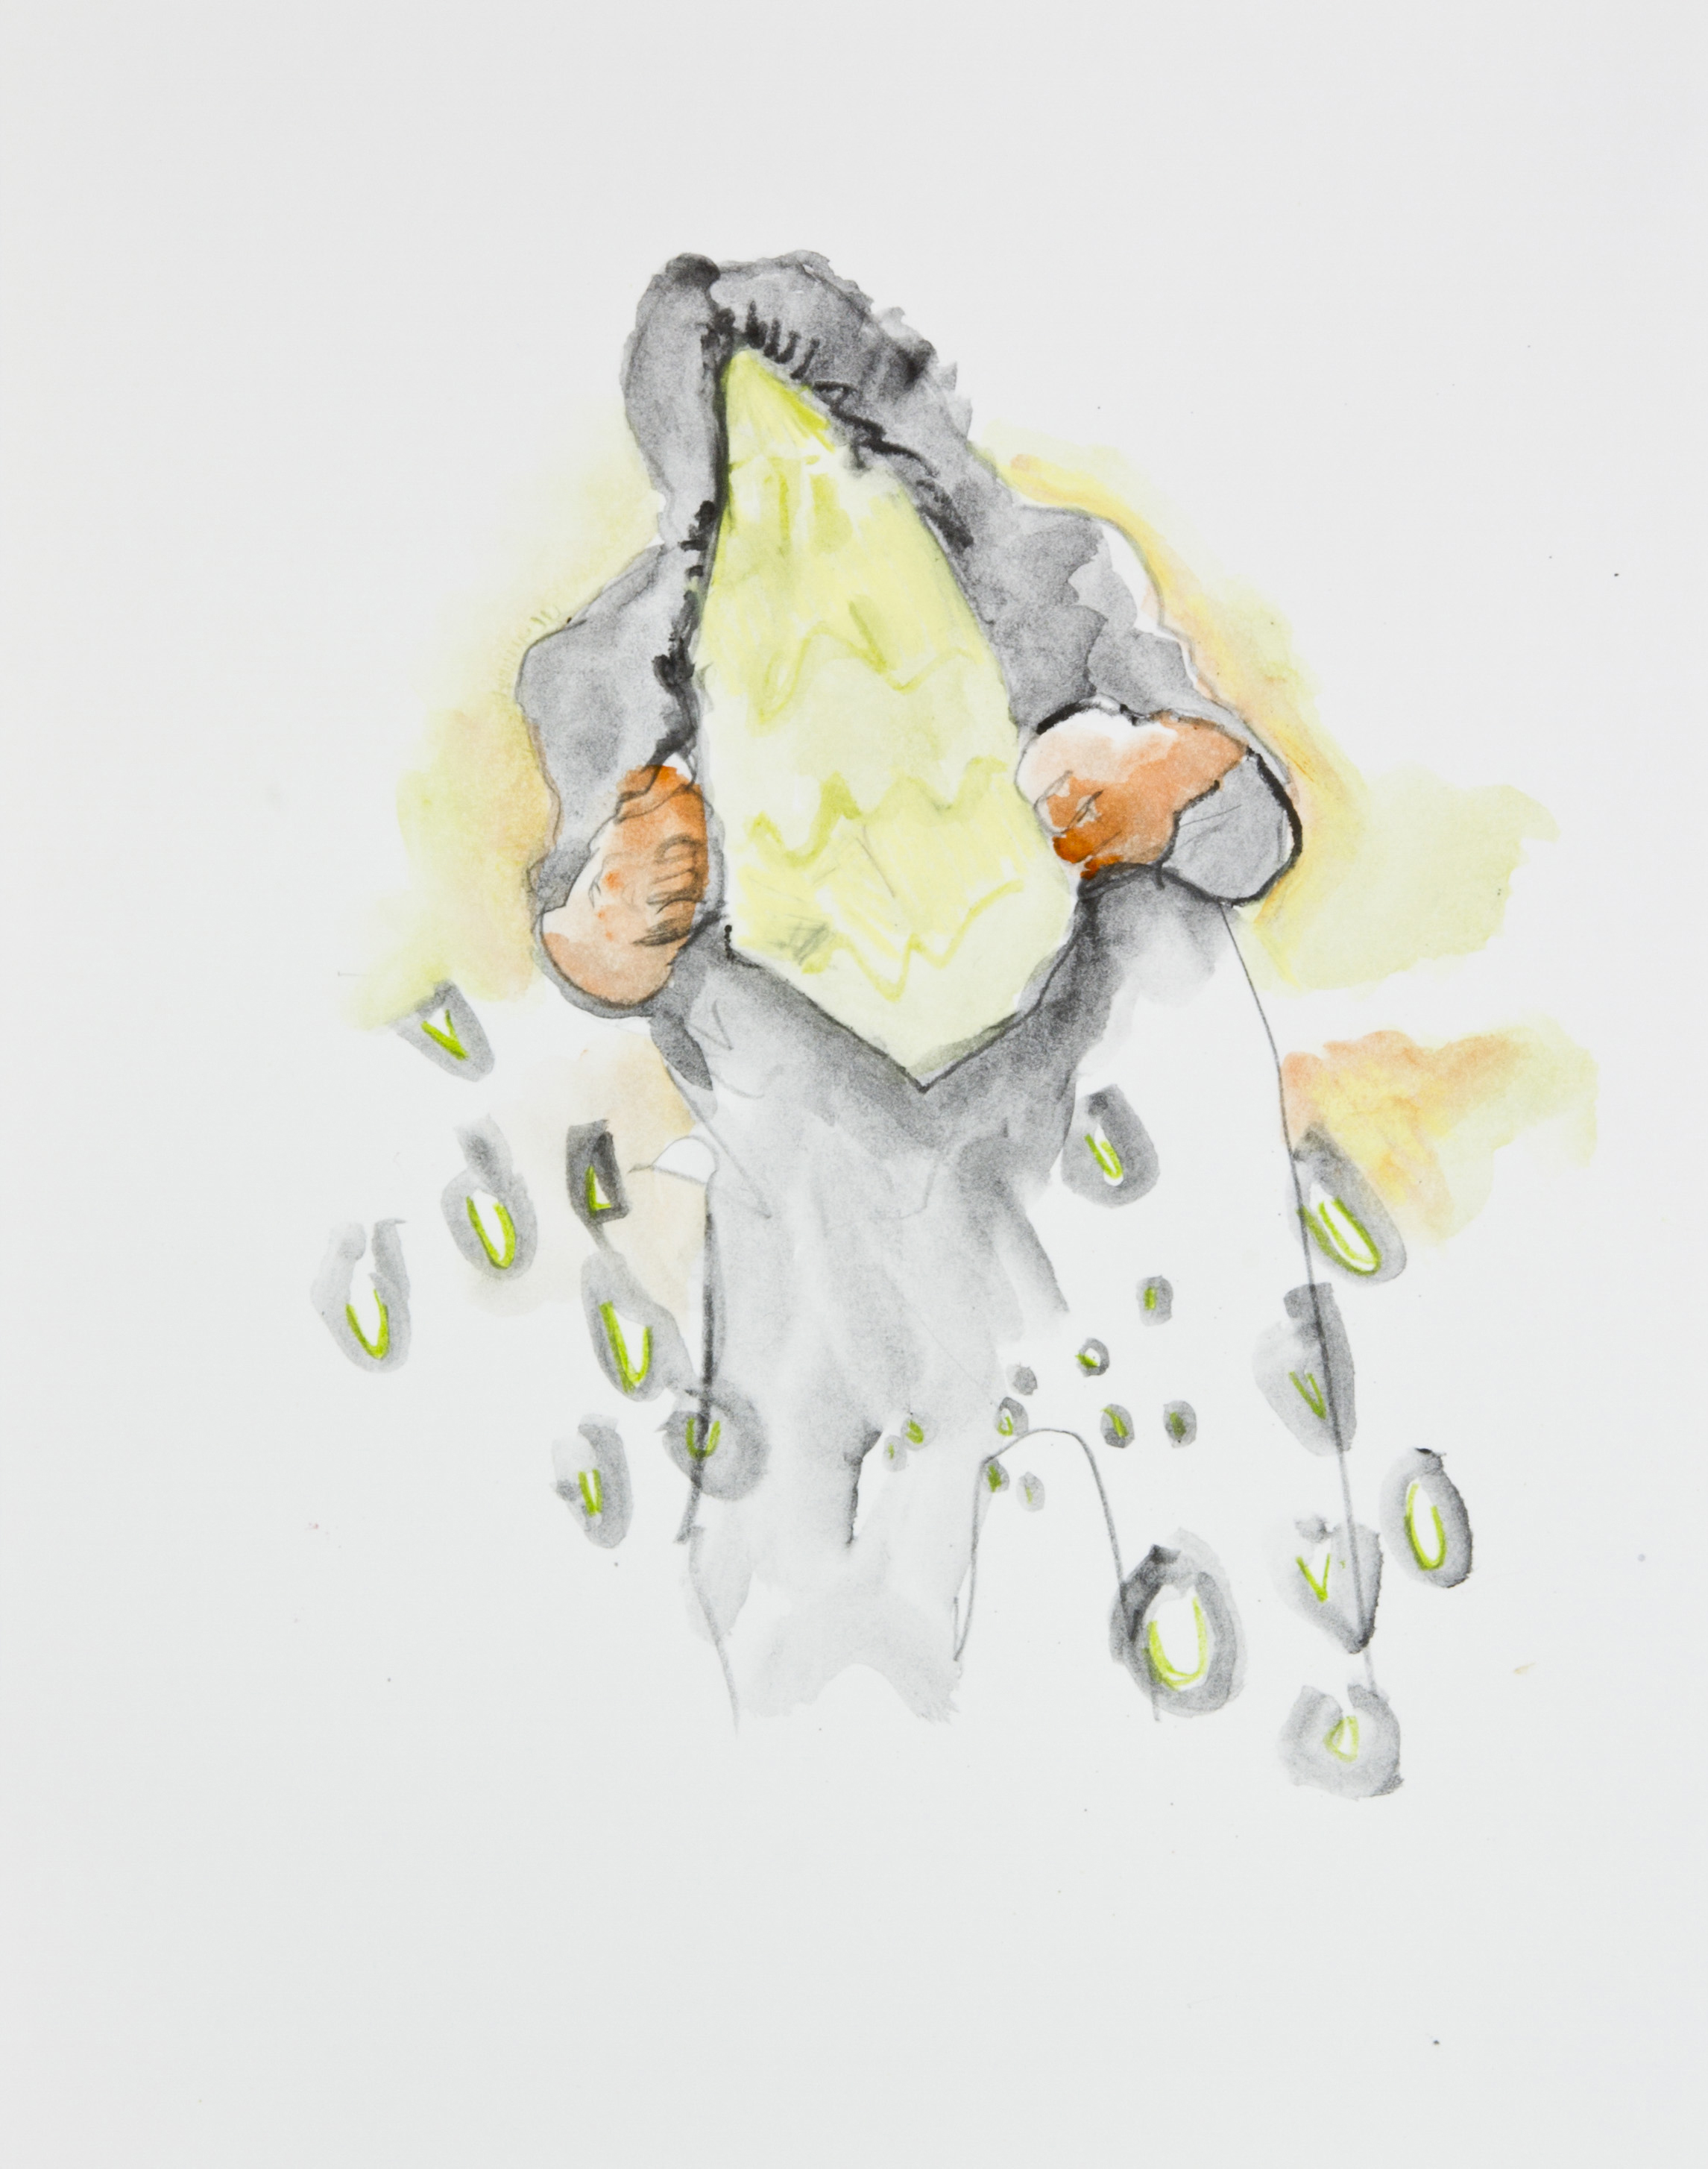 Introvert extrovert, 2013, graphite, crayon and watercolor pencil on paper, 11x14 inches